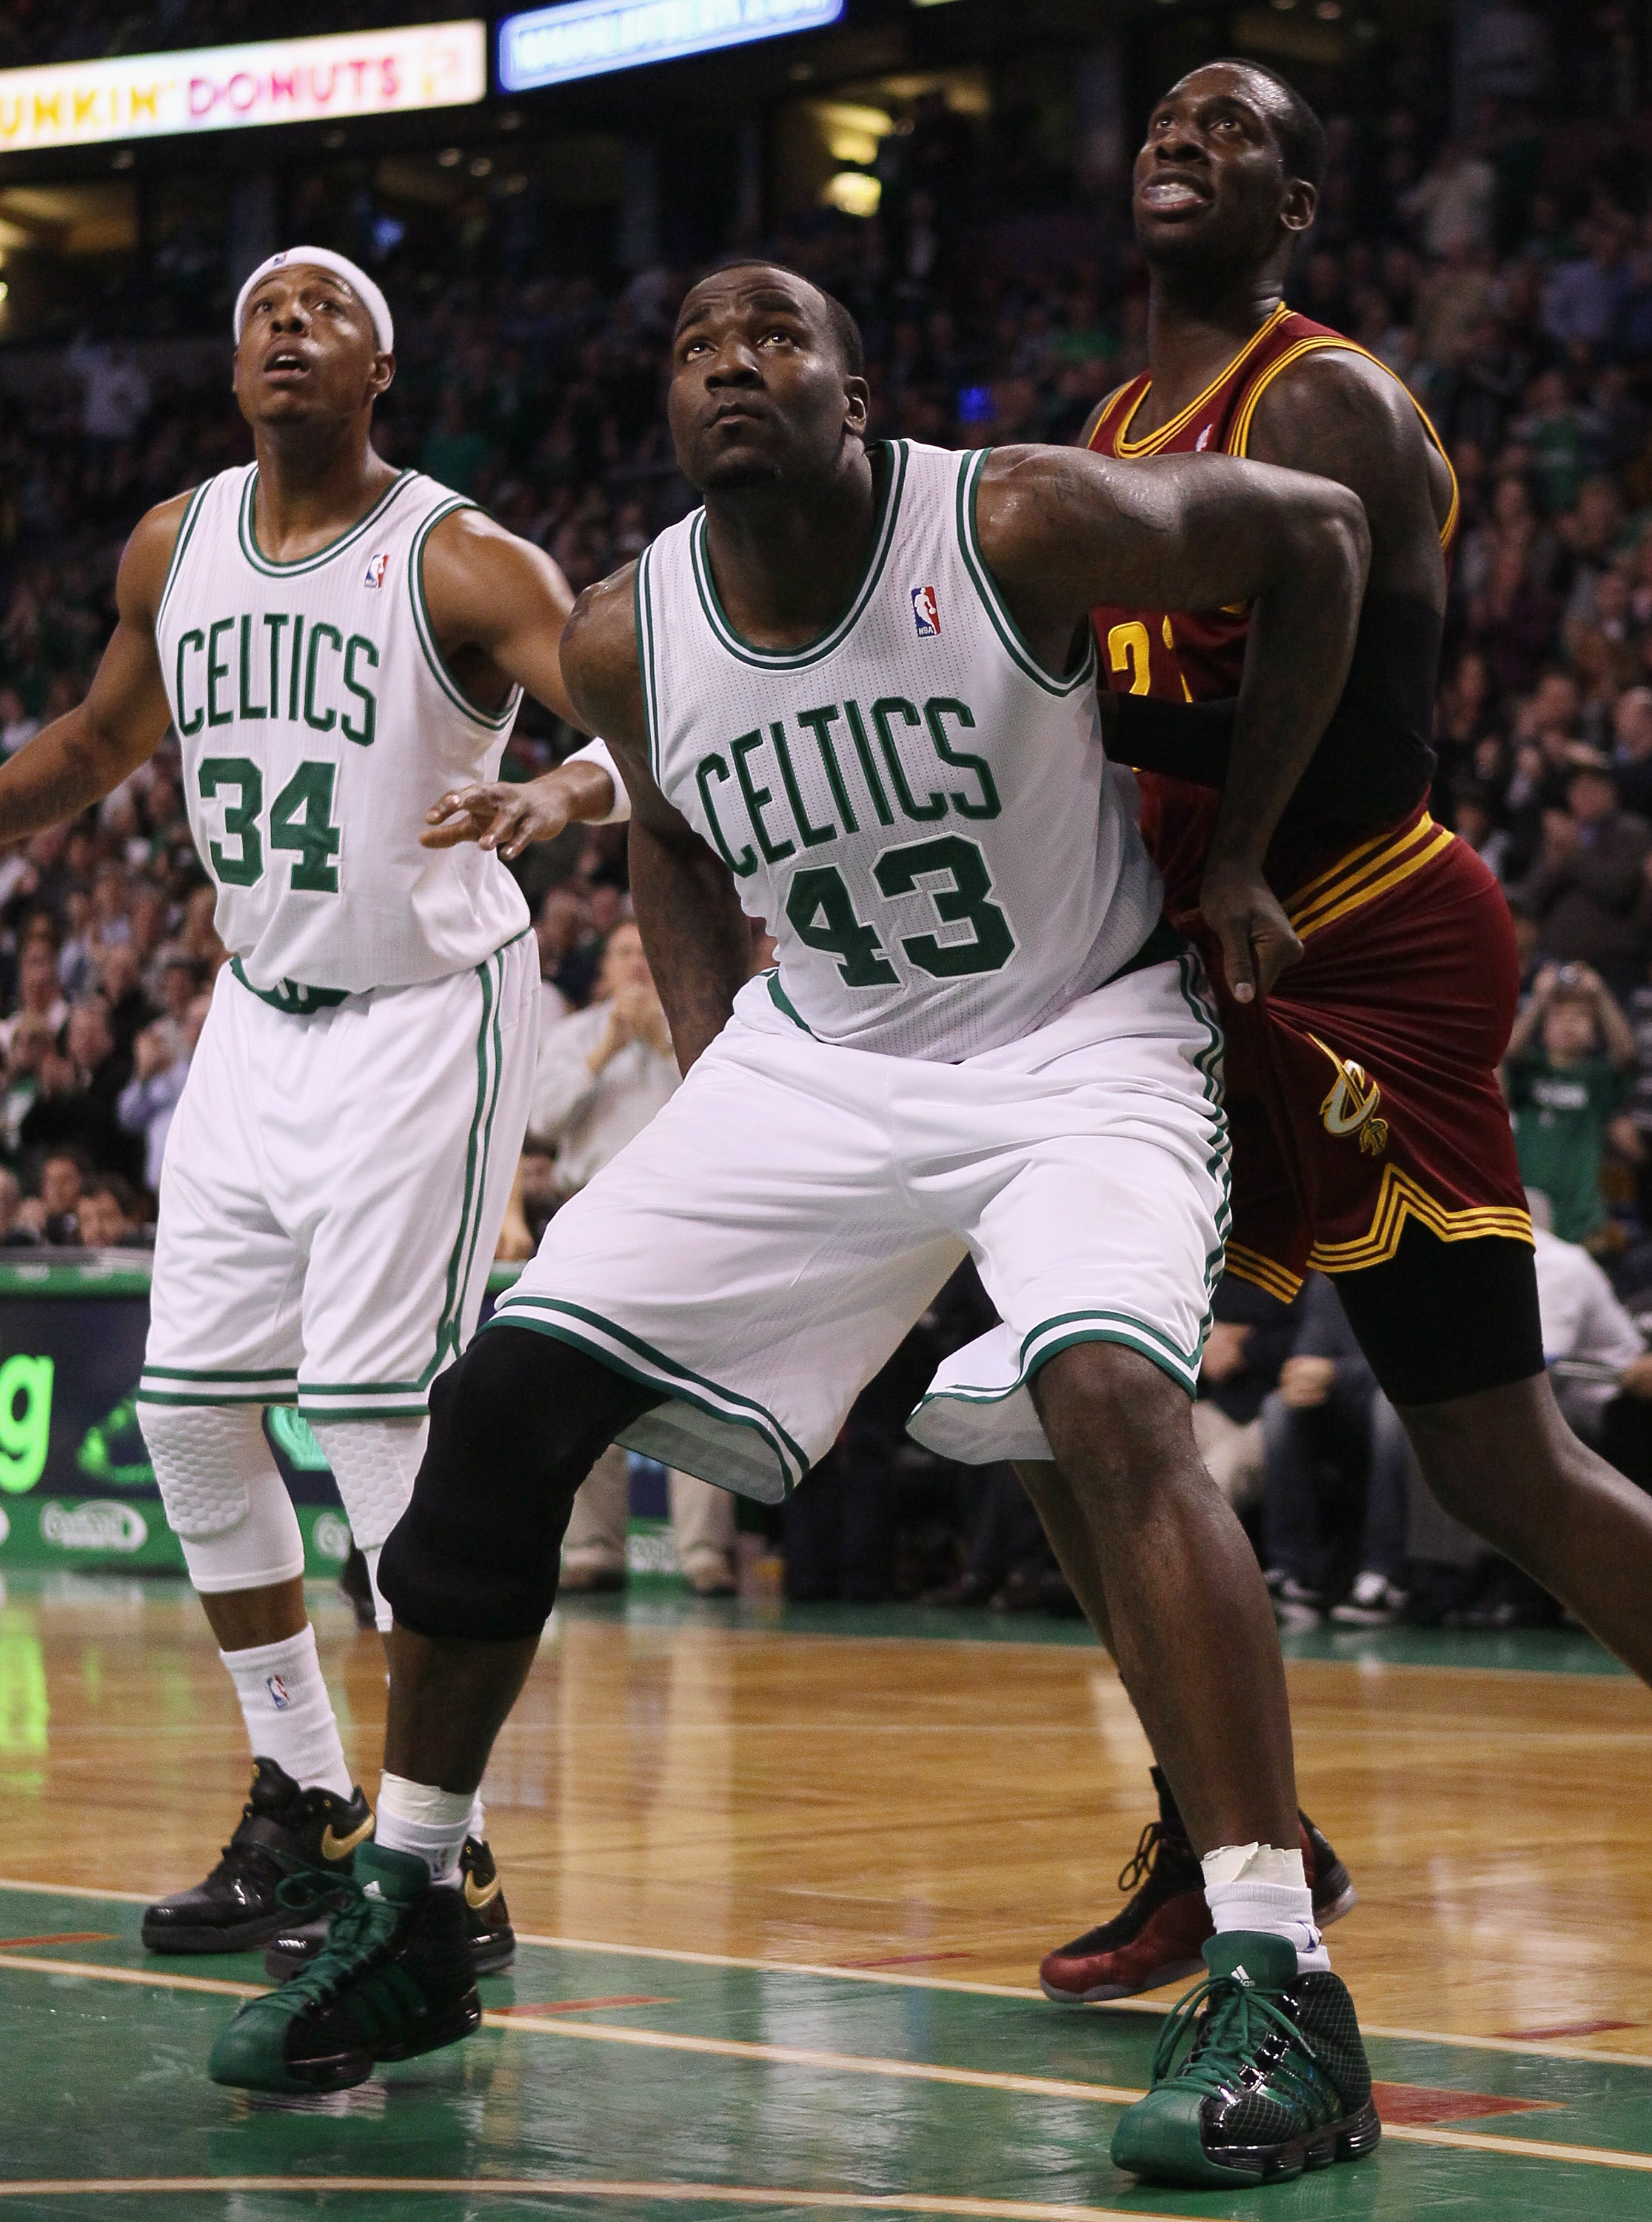 BOSTON, MA - JANUARY 25:  Kendrick Perkins #43  of the Boston Celtics blocks a shot as J.J. Hickson #21 of the of the Cleveland Cavaliers stands by on January 25, 2011 at the TD Garden in Boston, Massachusetts.   NOTE TO USER: User expressly acknowledges